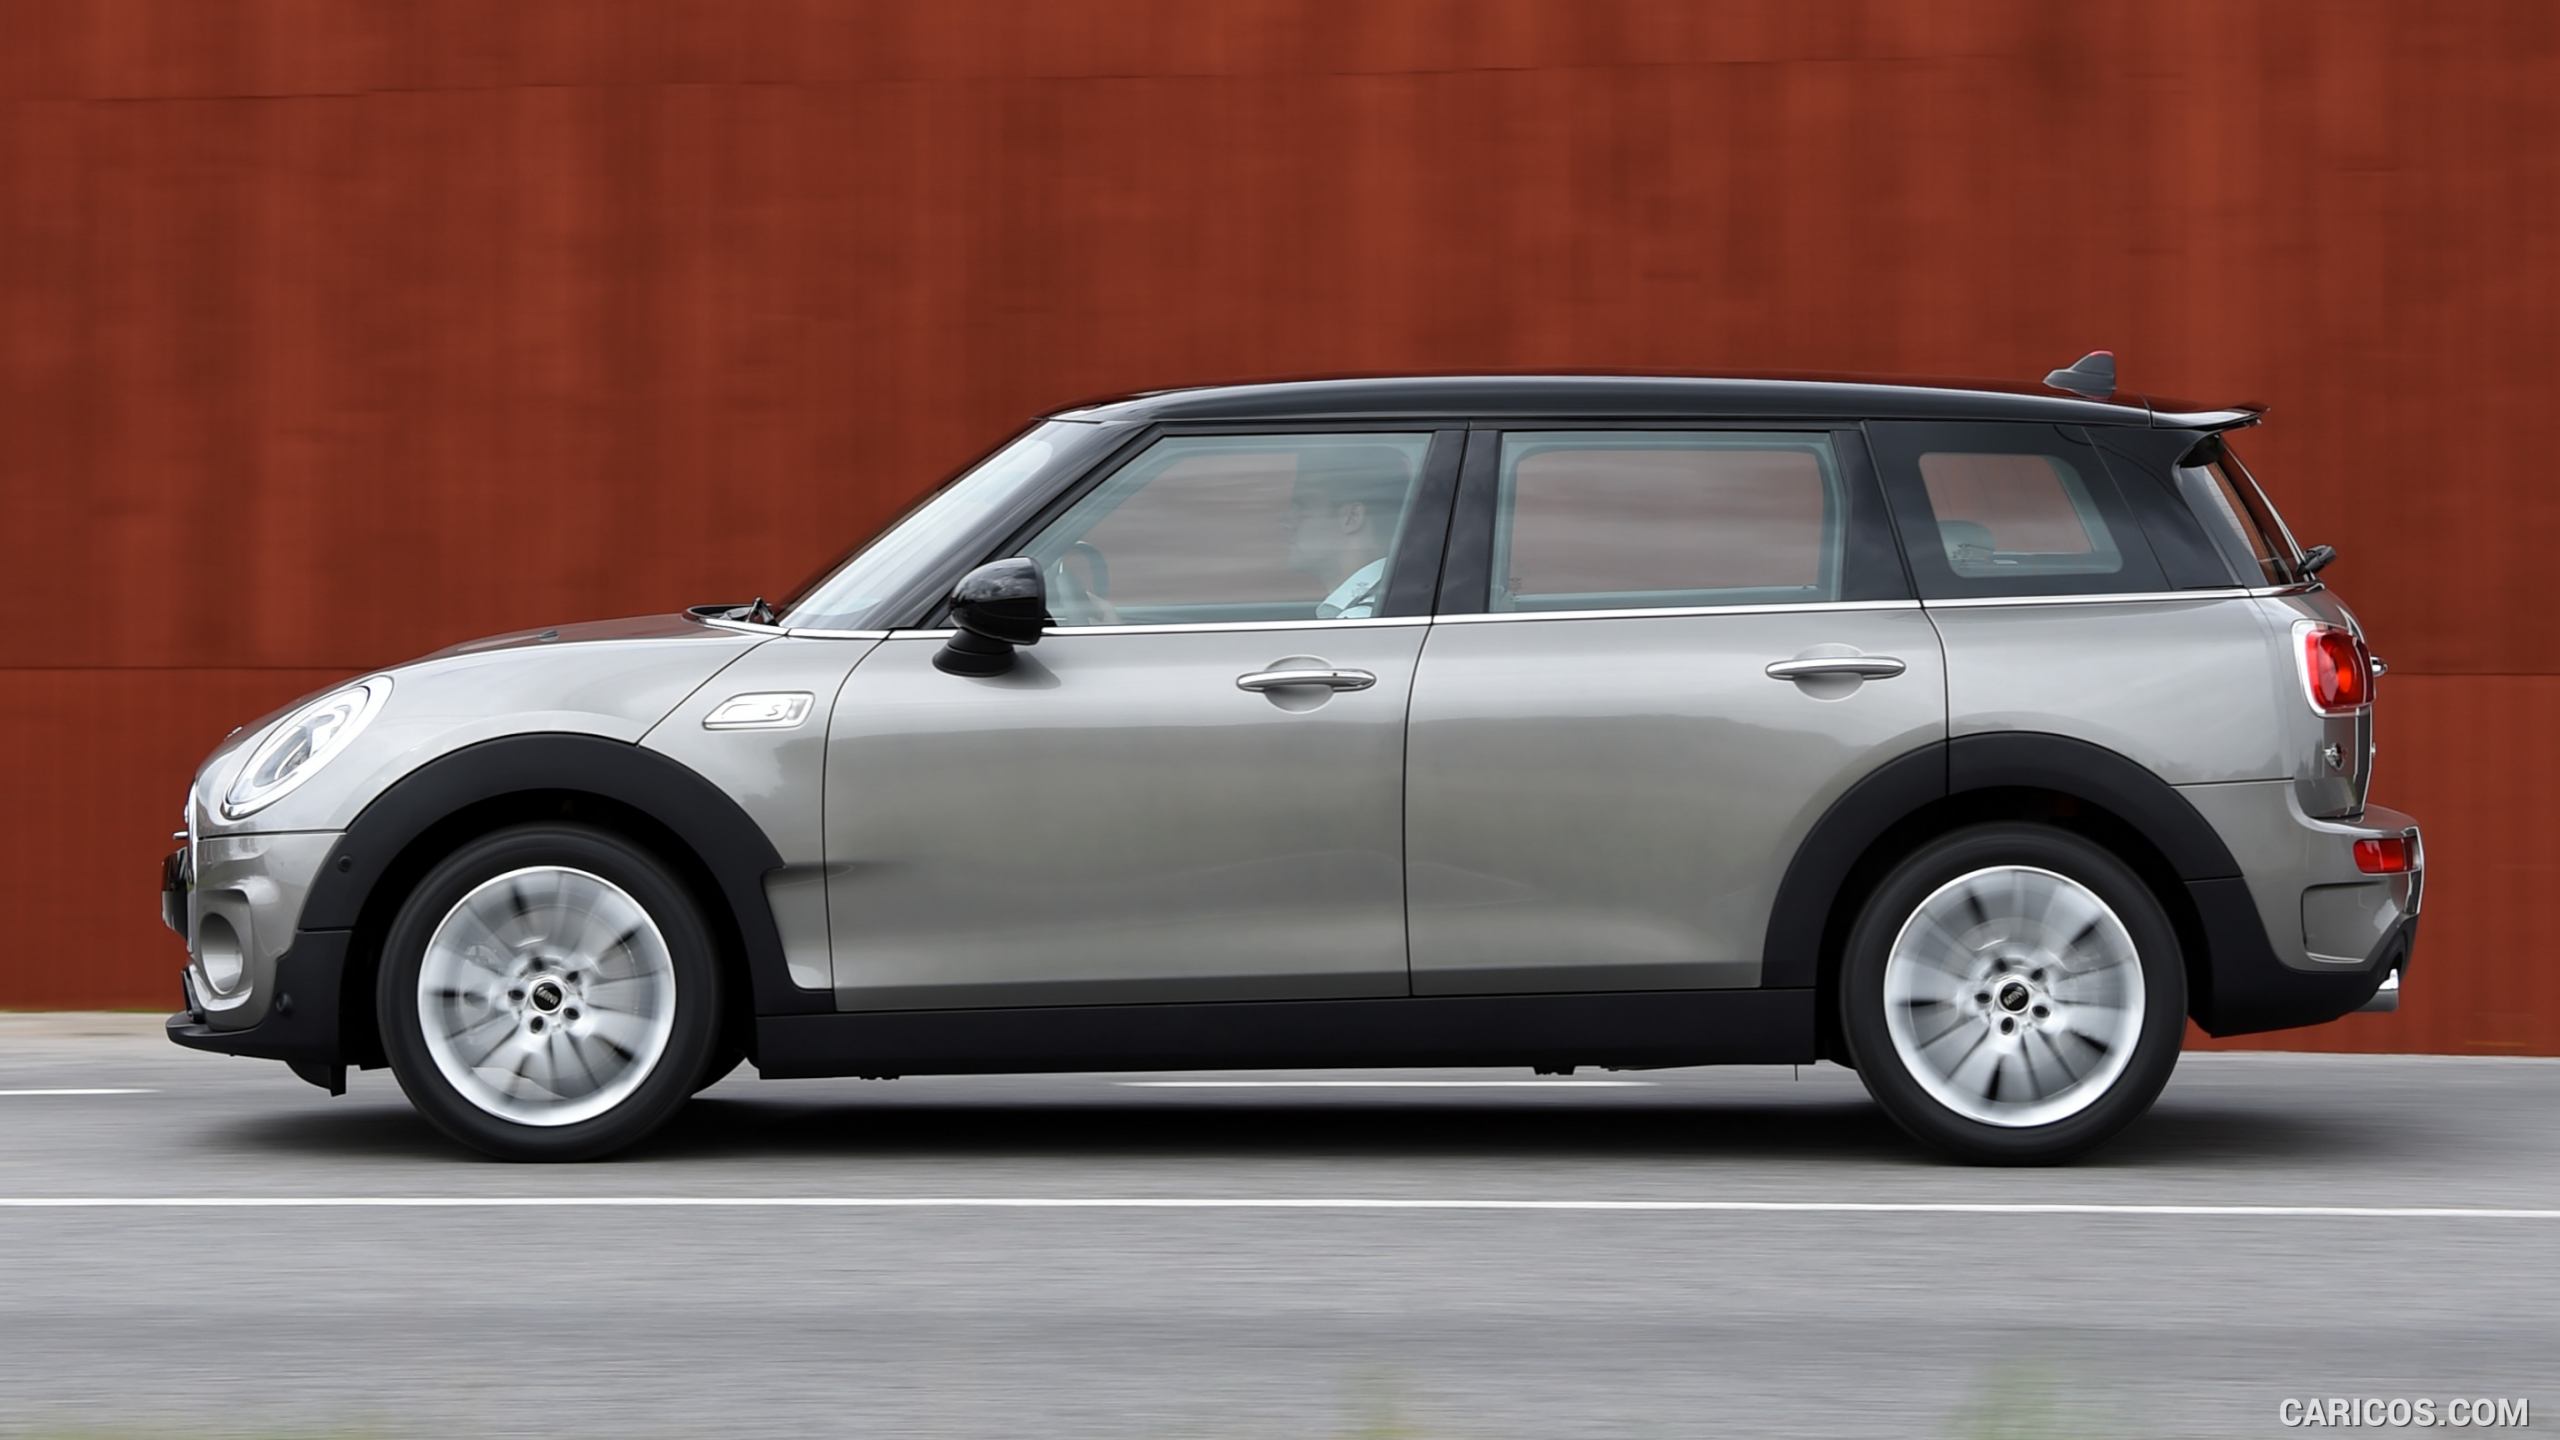 2016 MINI Cooper S Clubman in Metallic Melting Silver - Side, #202 of 380